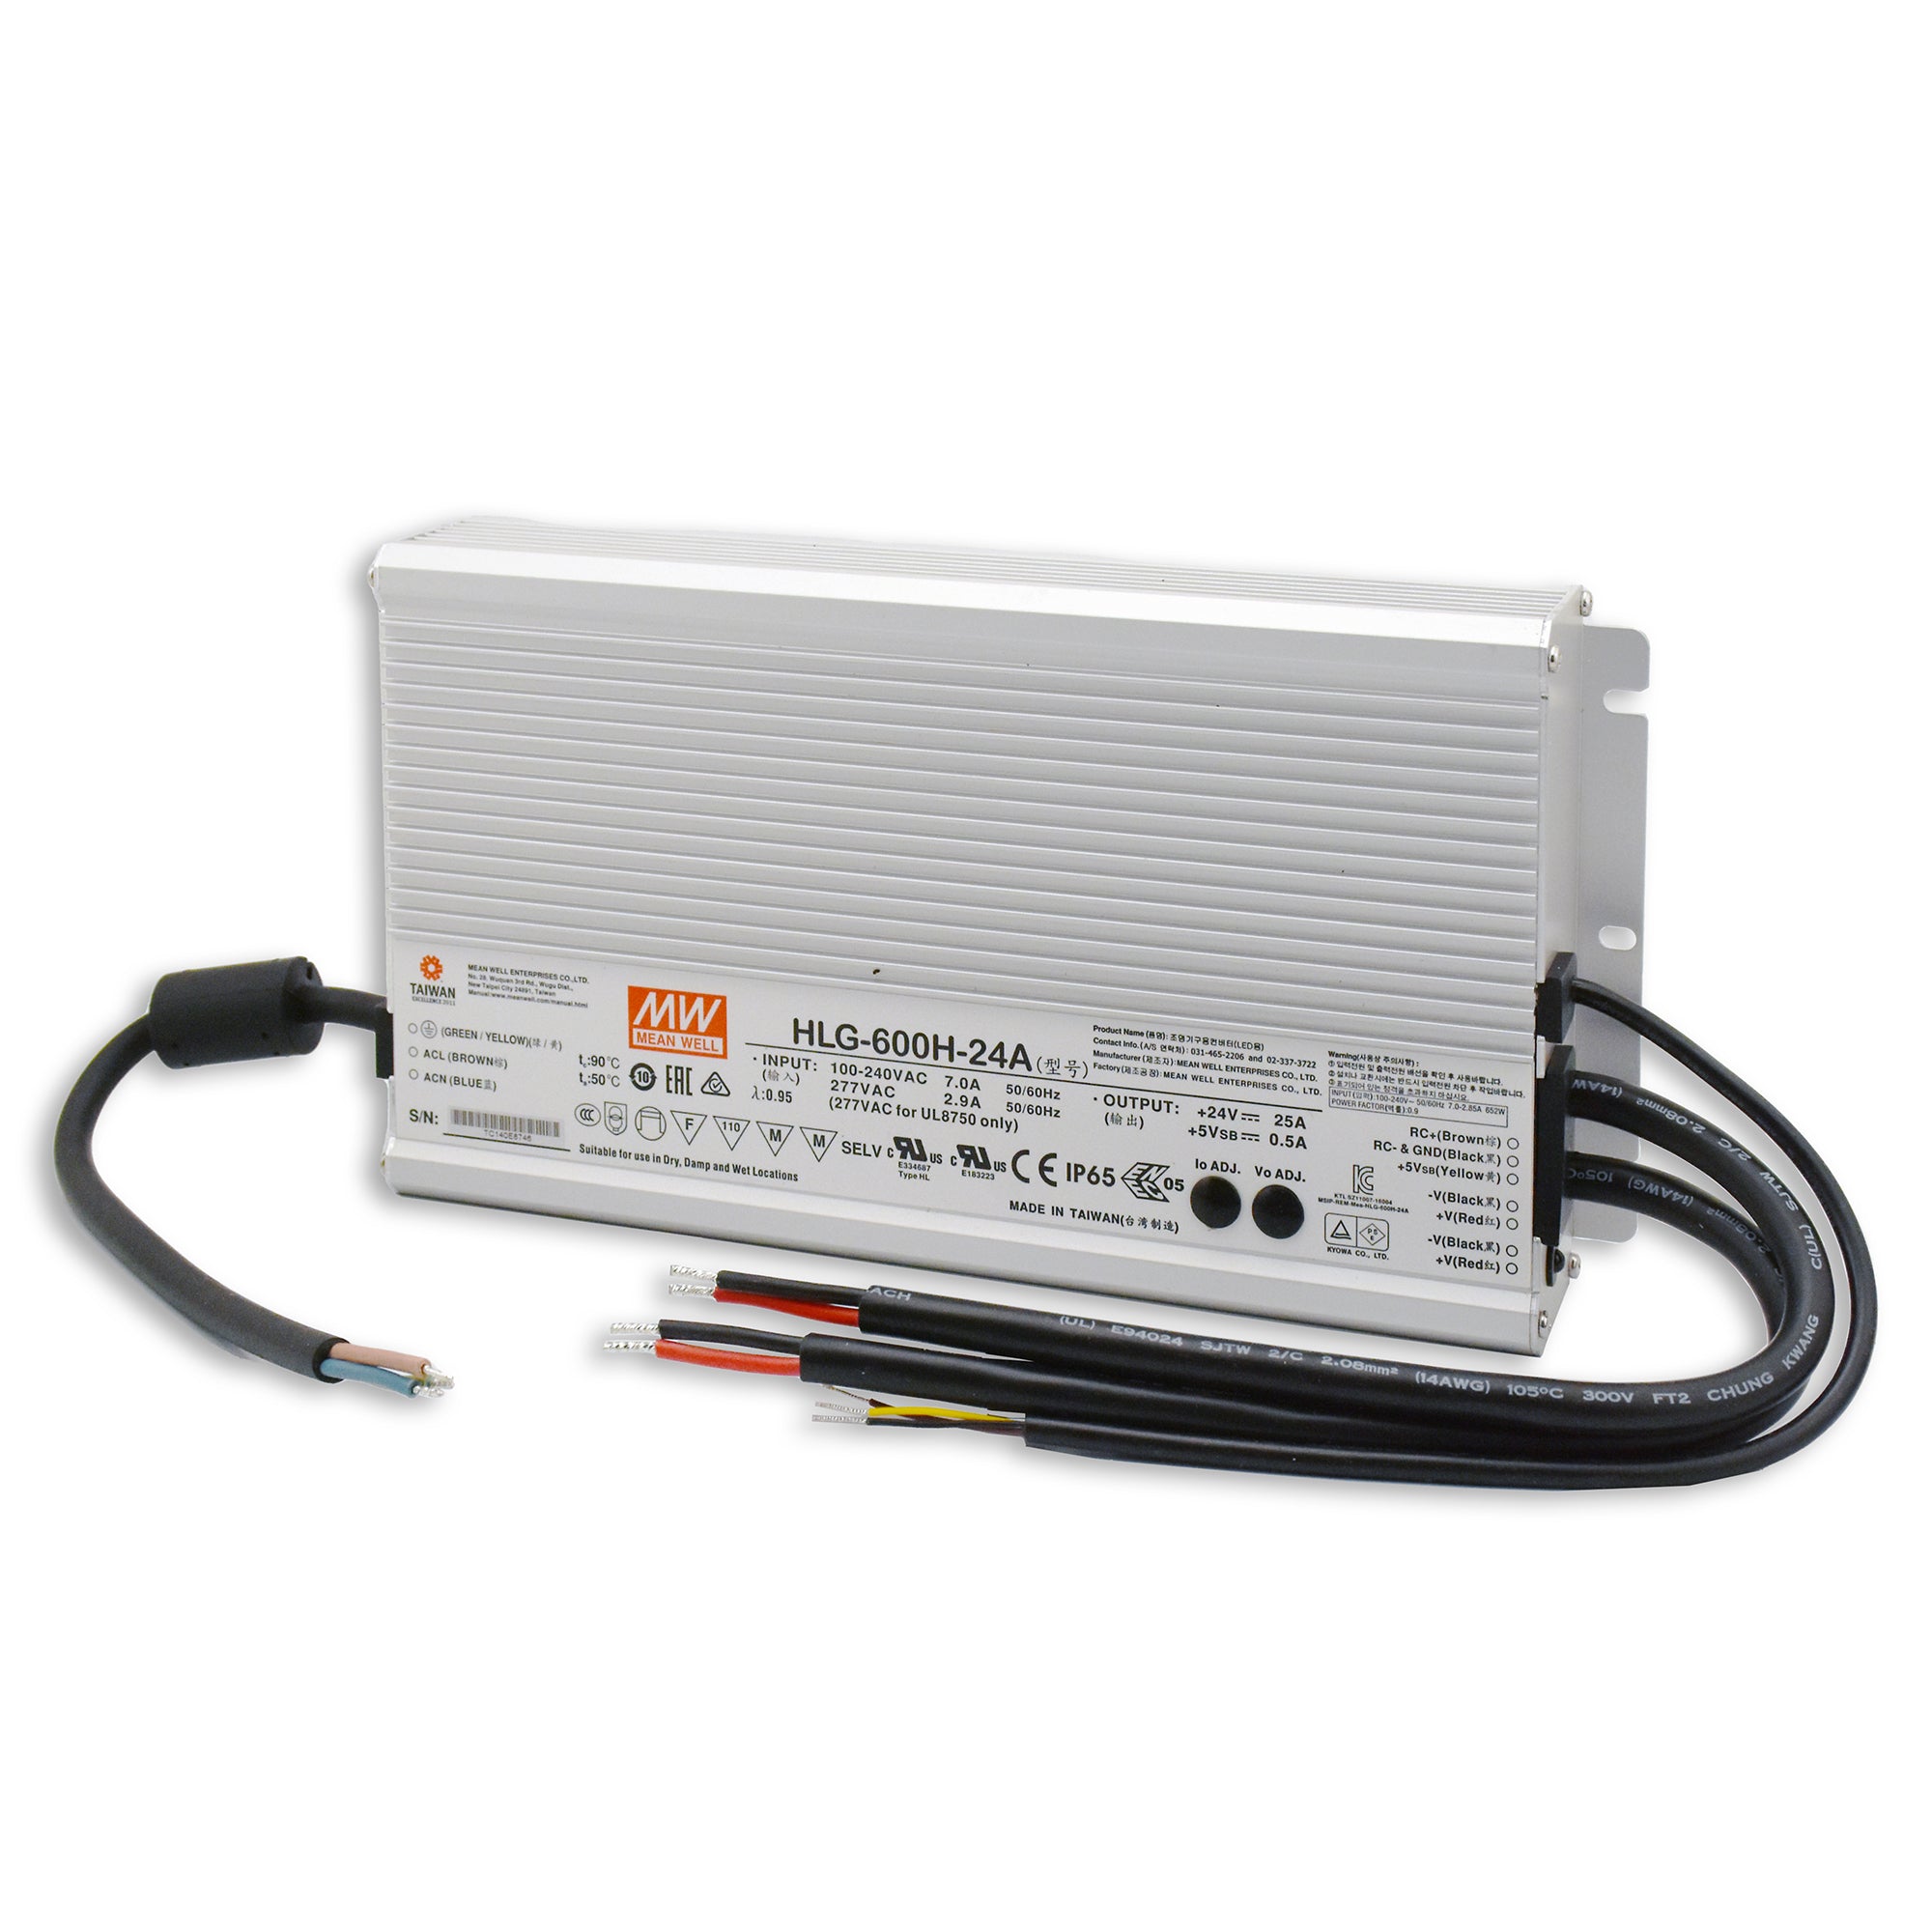 HLG Fanless & Metal Housed Power Supplies